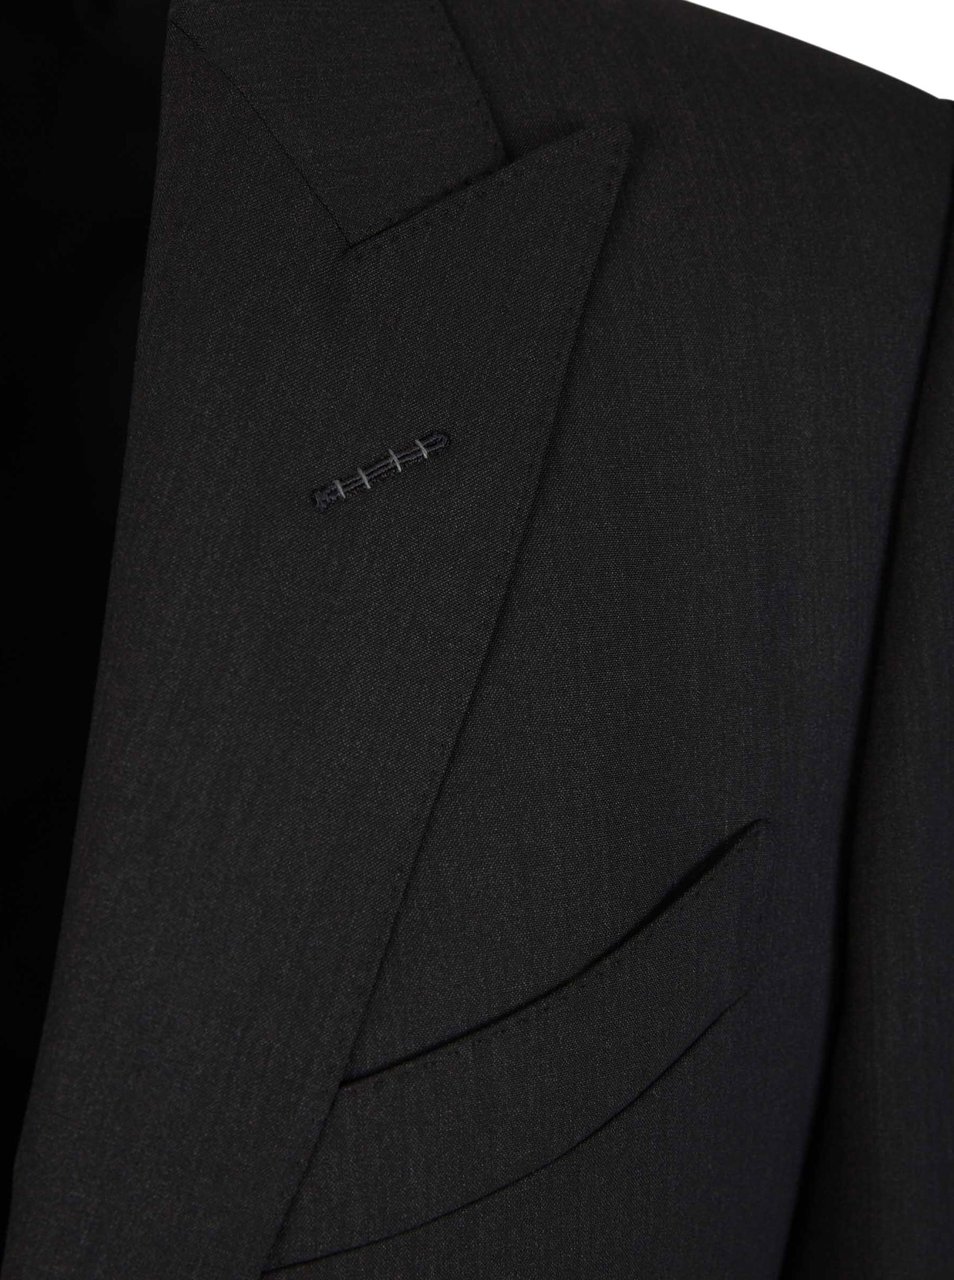 Tom Ford Wool Suit Grijs